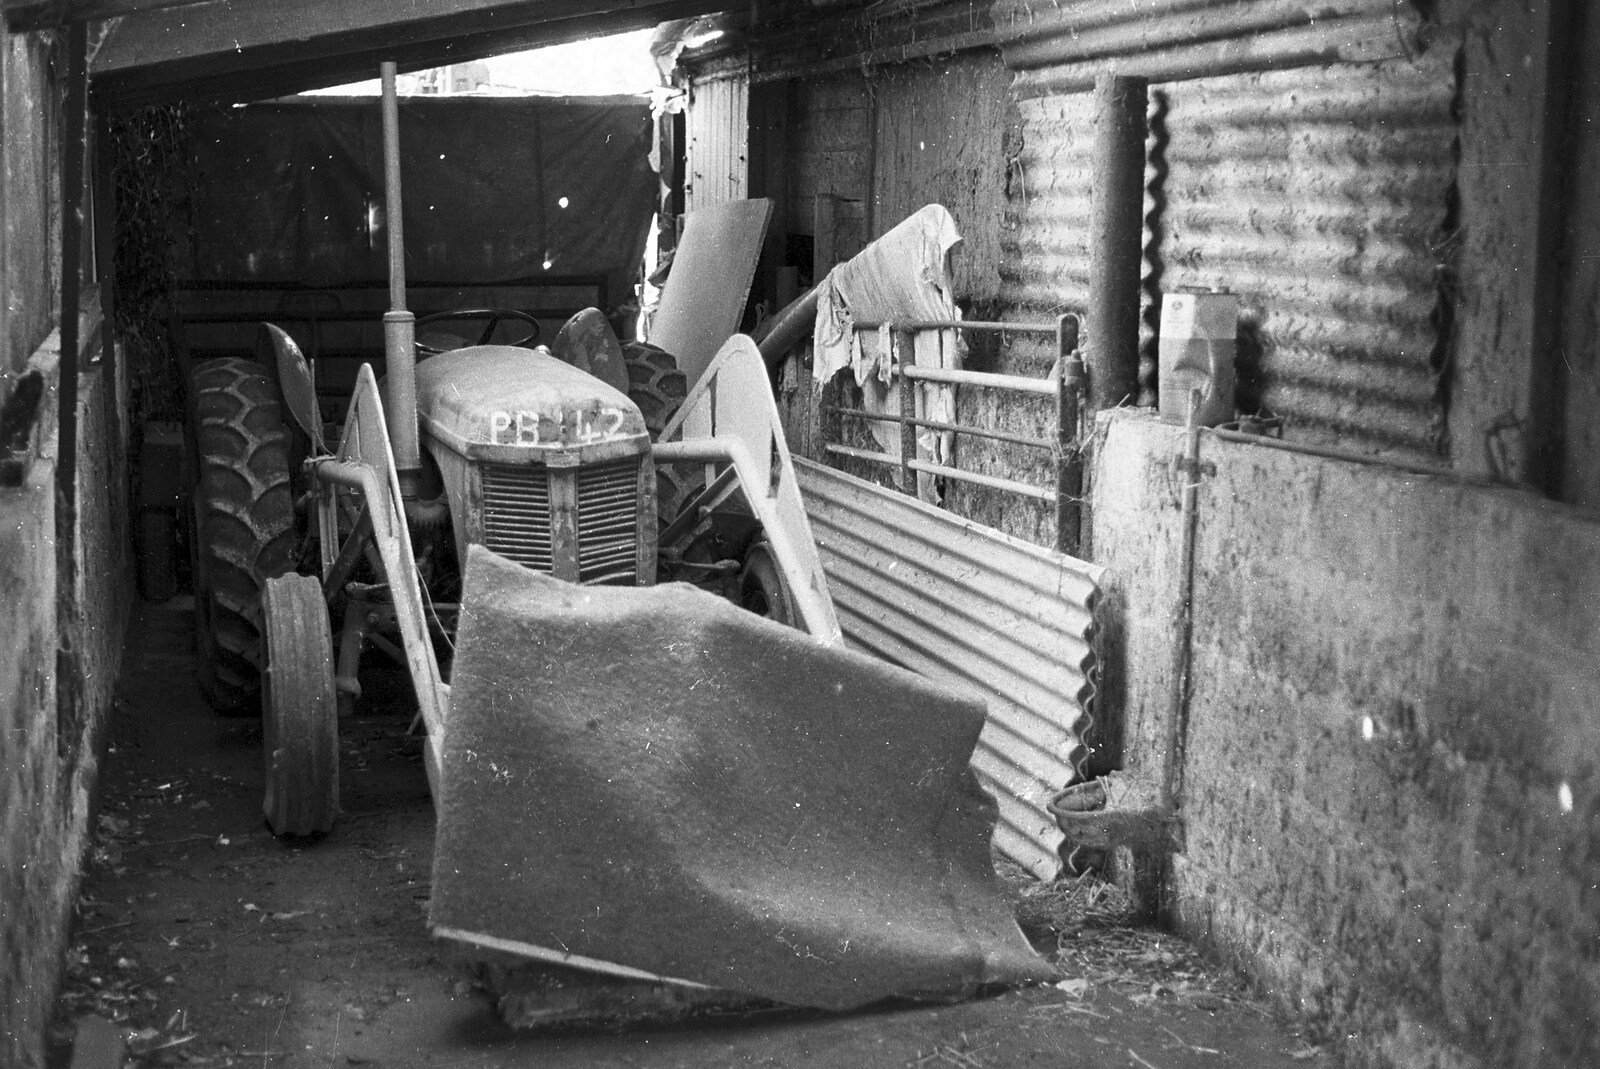 A Black and White Life in Concrete, Stuston, Suffolk - 3rd September 1992: Winnie the tractor in the garage